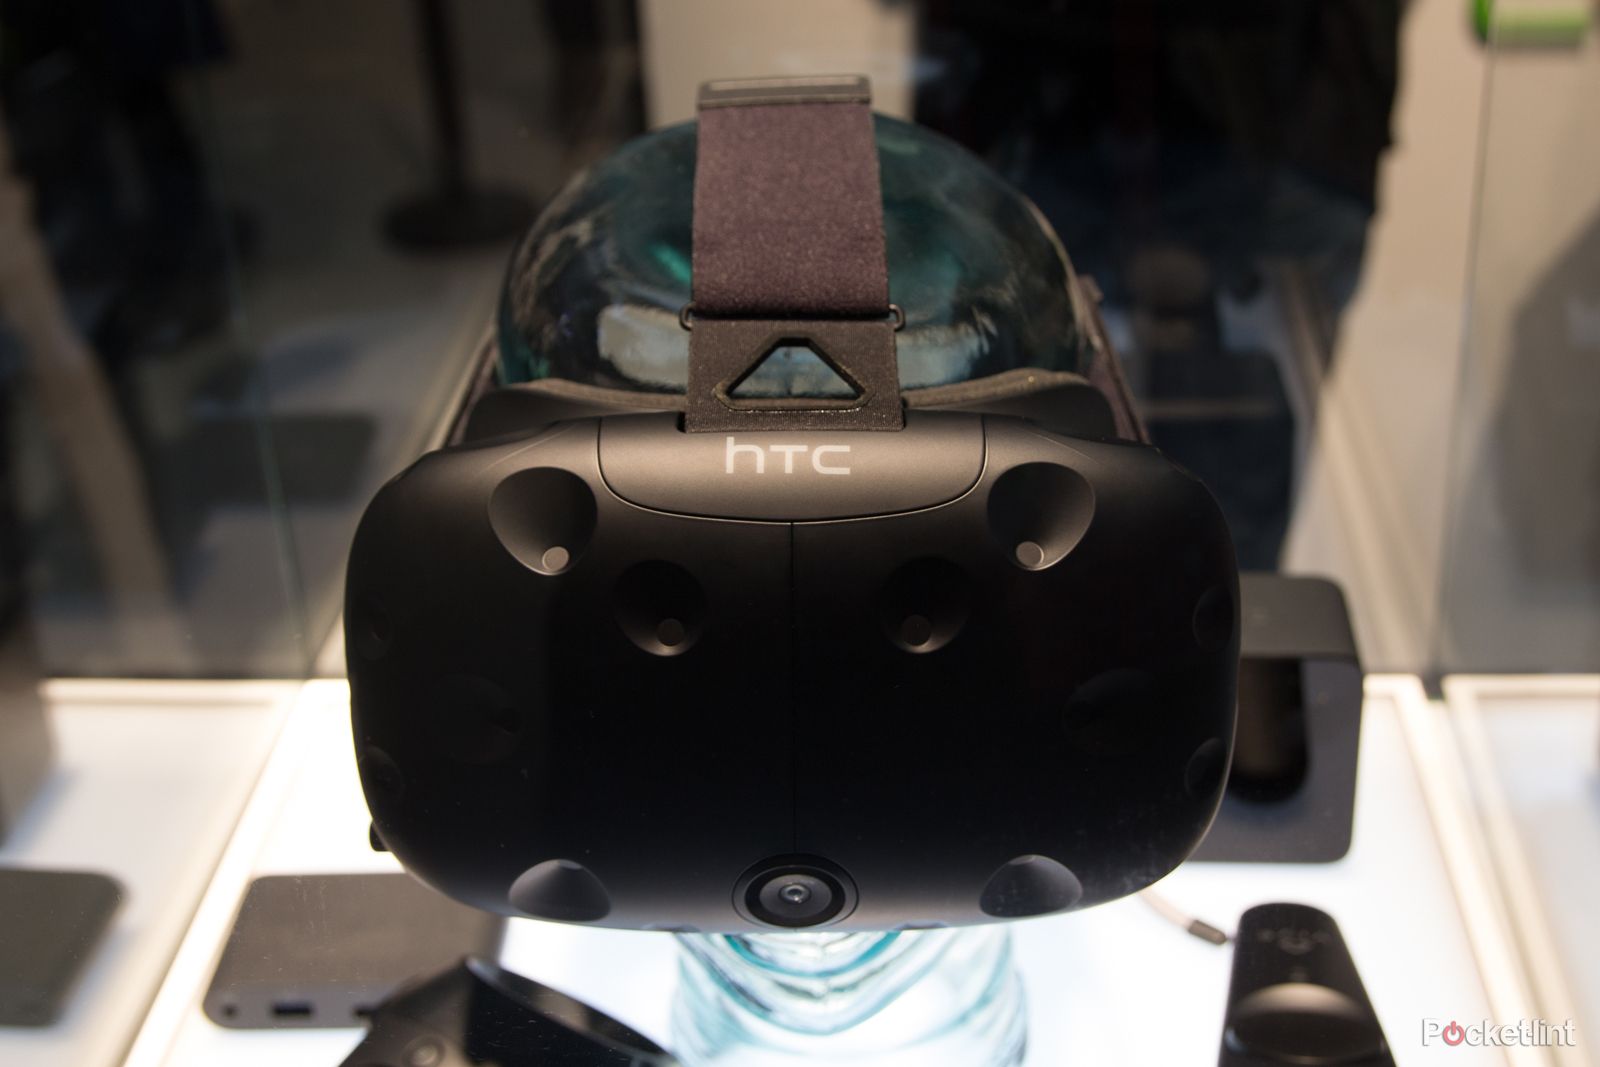 htc vive consumer edition eyes on the final hardware image 1